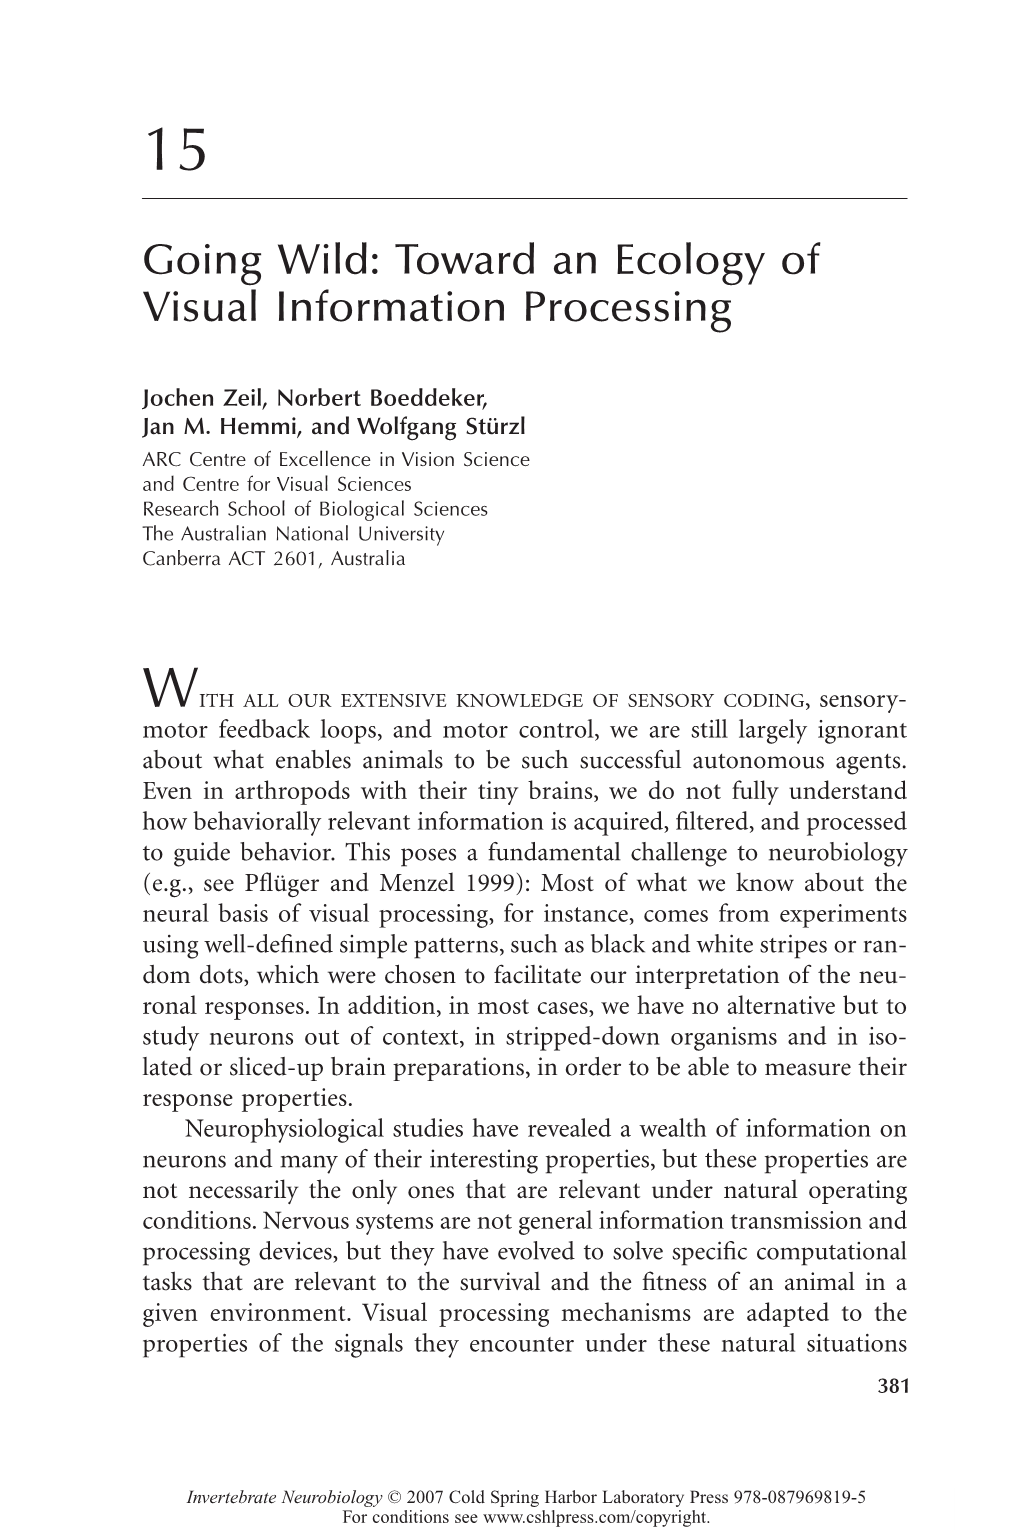 Toward an Ecology of Visual Information Processing